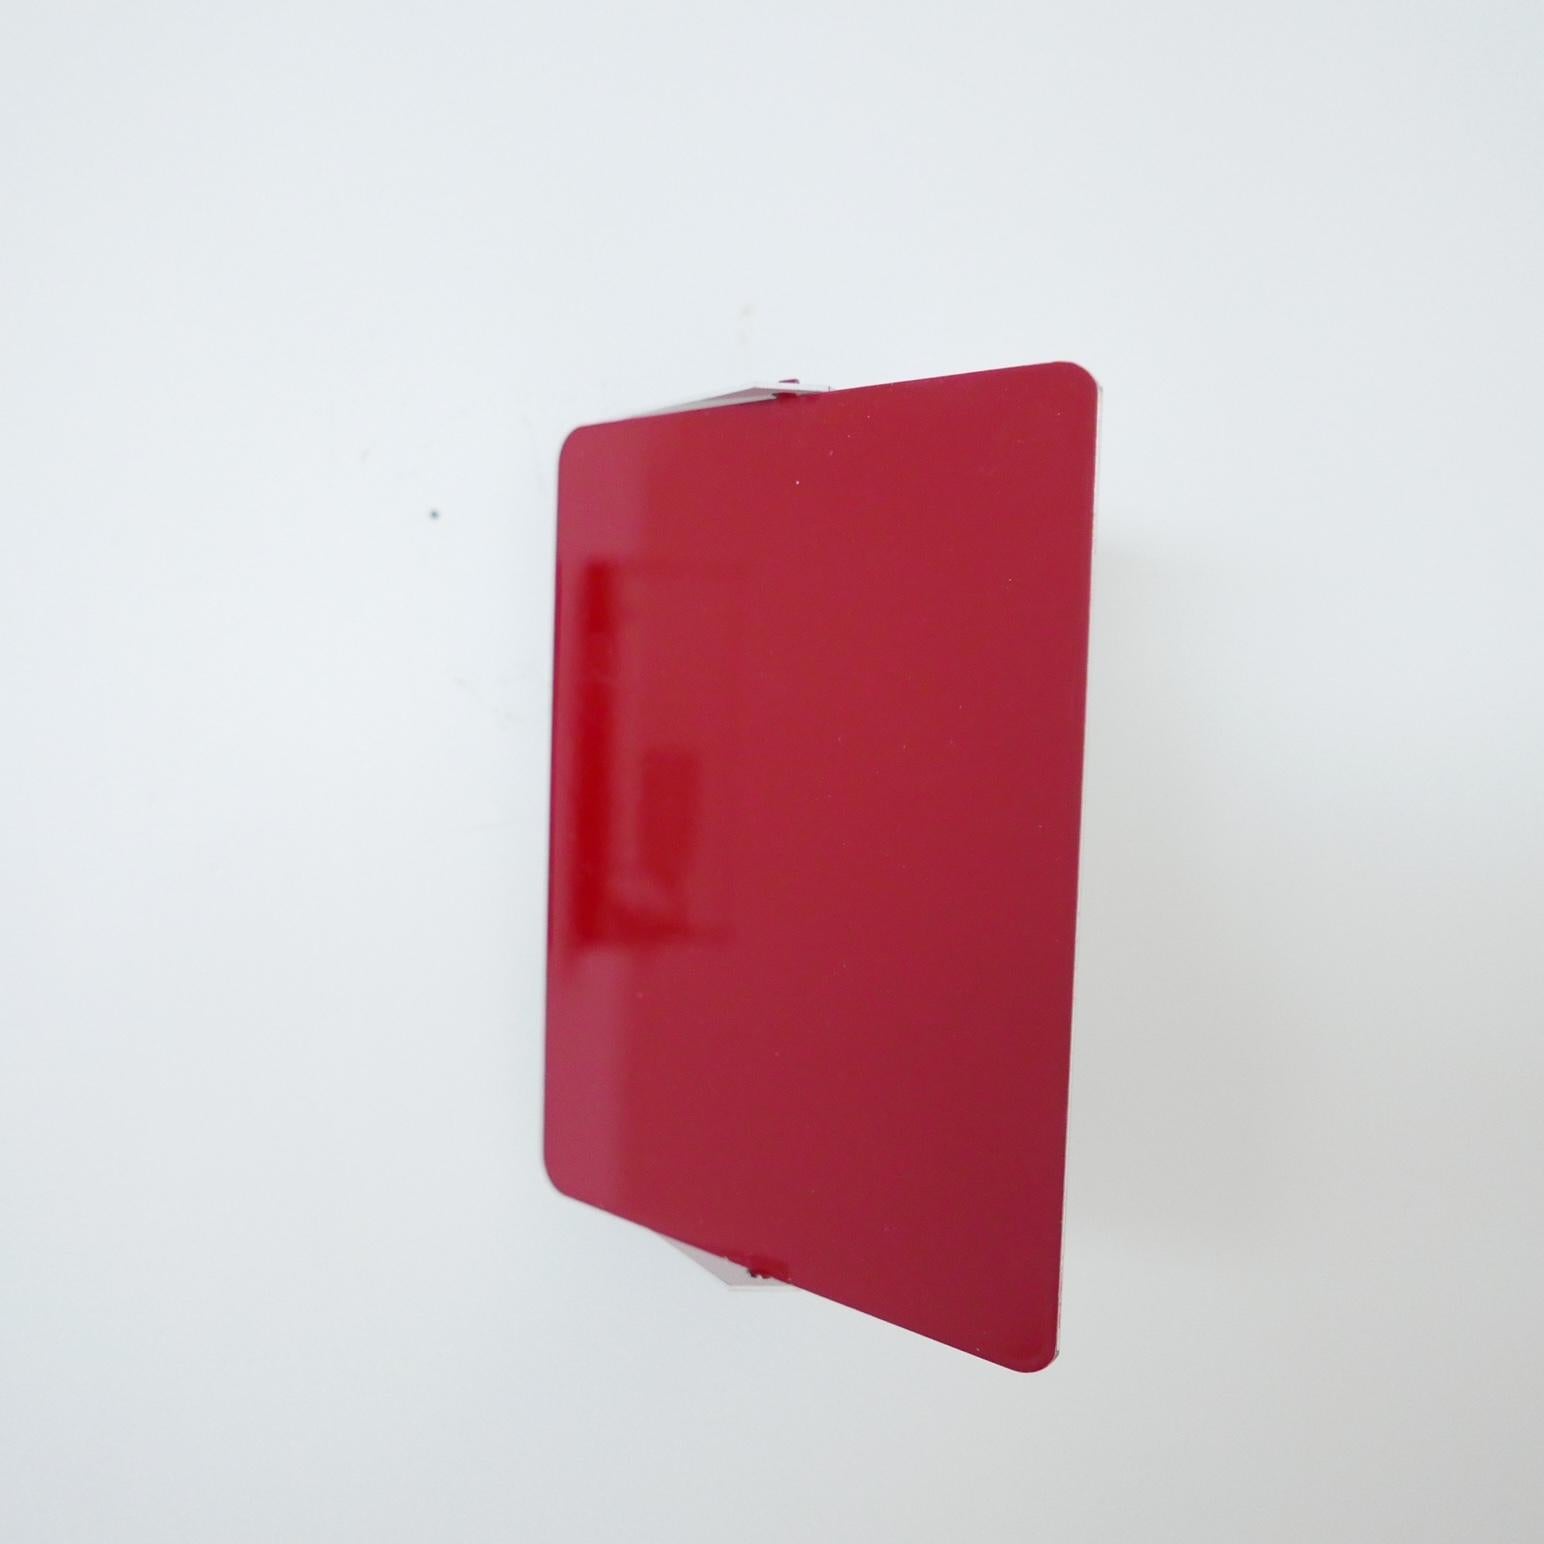 Charlotte Perriand Original Red Mid-Century Wall Lights (3 available) For Sale 6